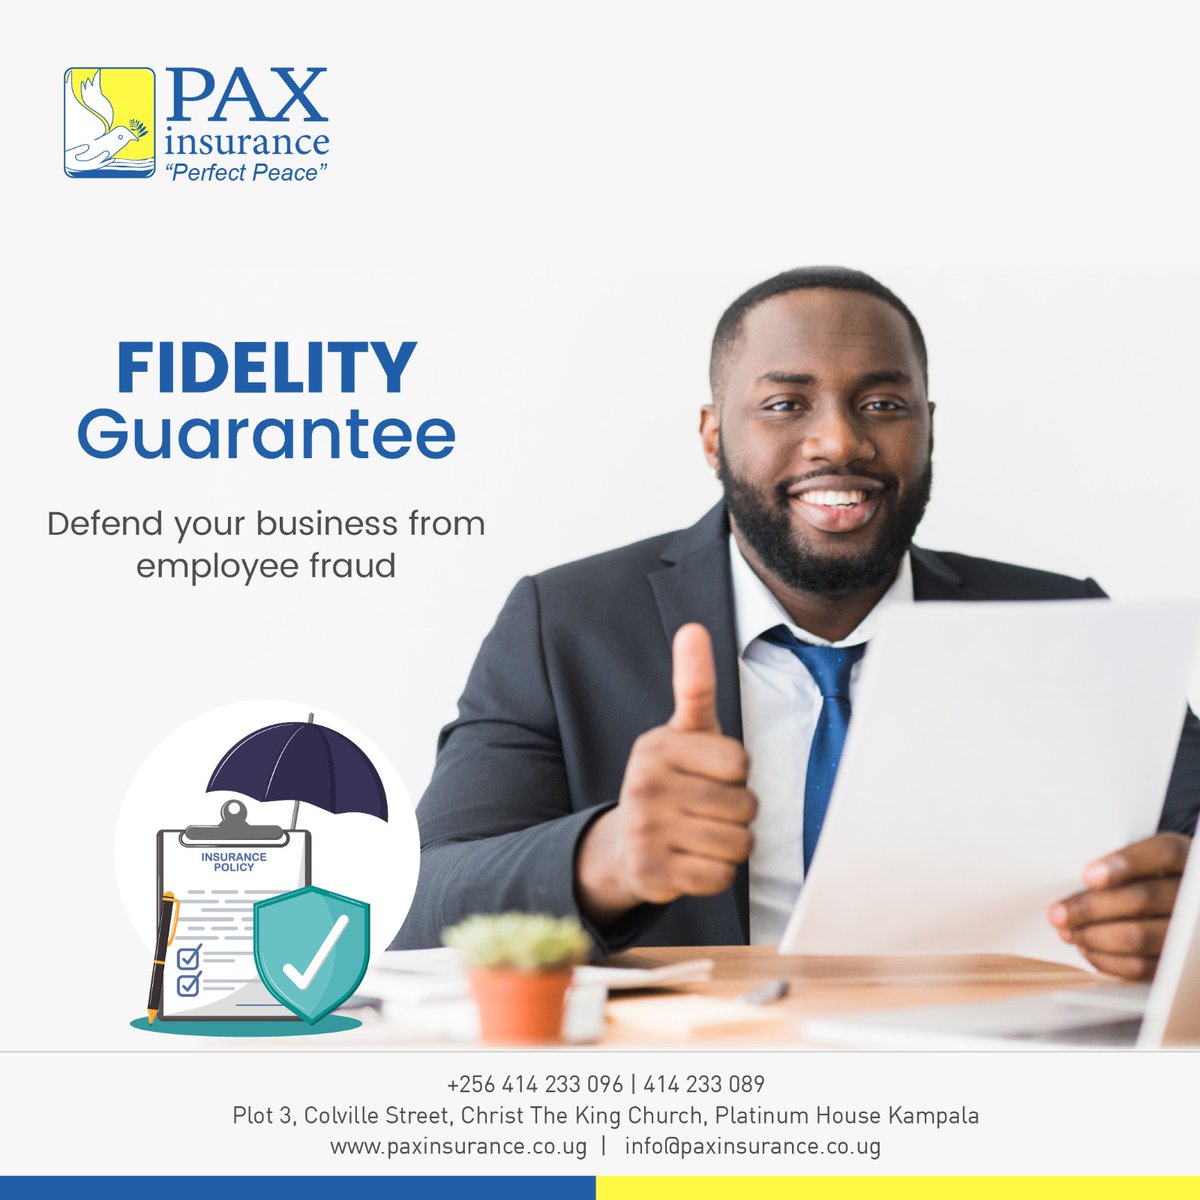 Don't let employee misconduct jeopardize your business's success. Fidelity Guarantee Insurance offers comprehensive coverage.

Call us on +256 414 233 096/+256 414 233 089

#FidelityGuarantee
#BusinessProtection
#InsuranceCoverage